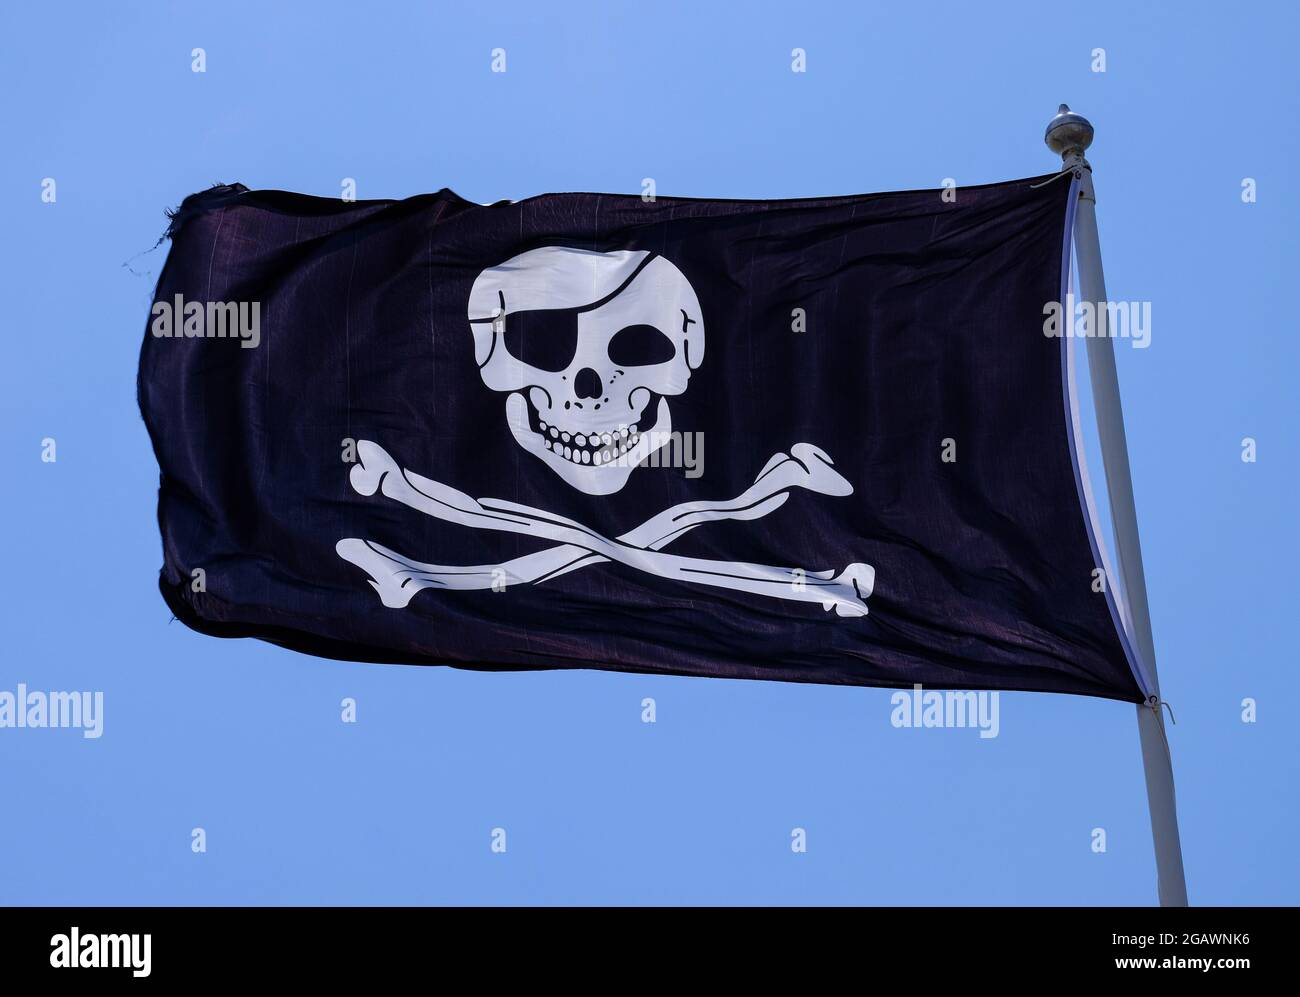 Pirate flag also known as a Jolly Roger flag or a Skull and Cross Bones Flag, pictured against a blue sky. Stock Photo